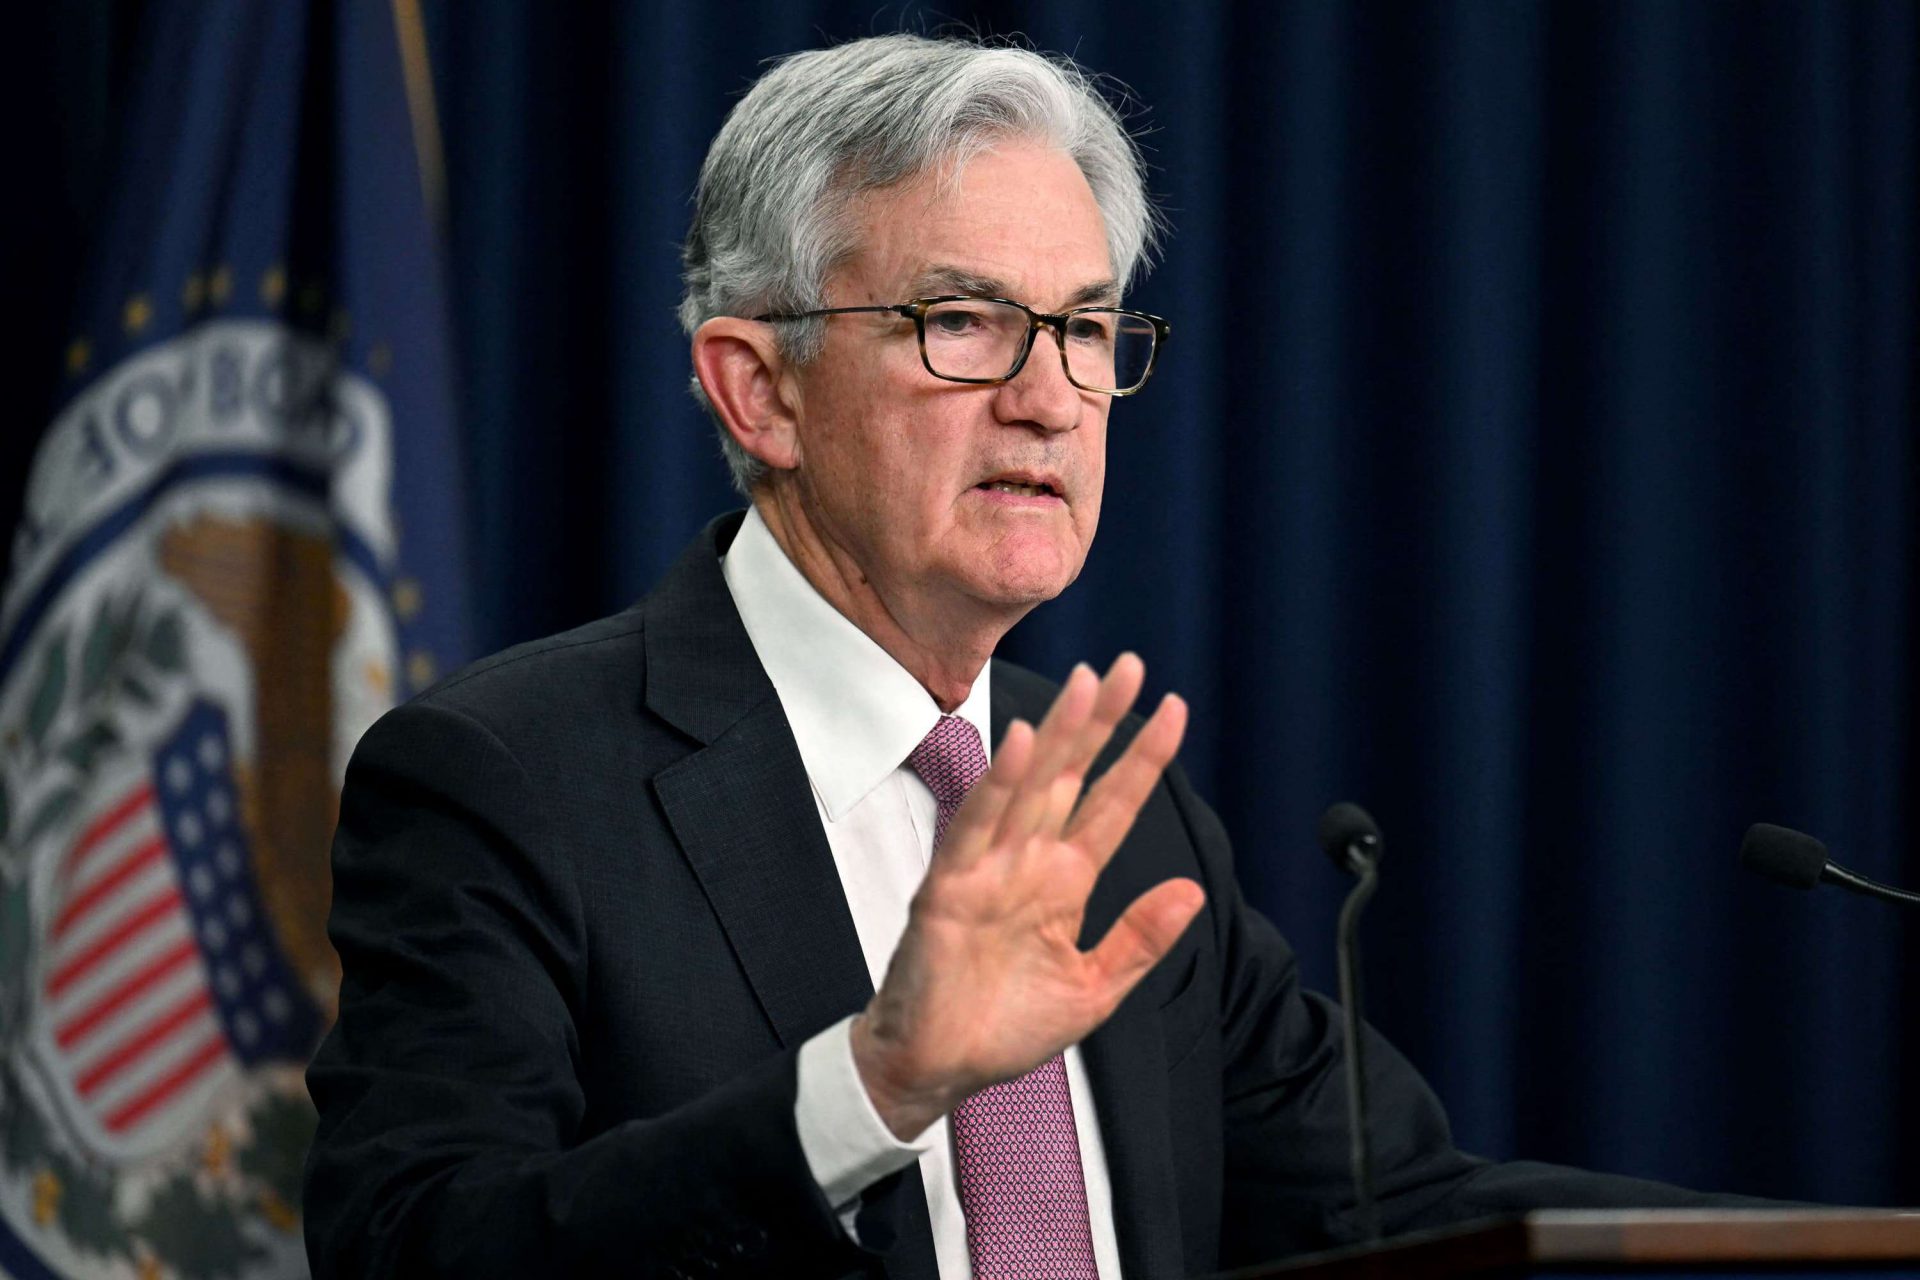 US Economy: What Will Happen If the Federal Reserve Doesn’t Cut Rates Soon?